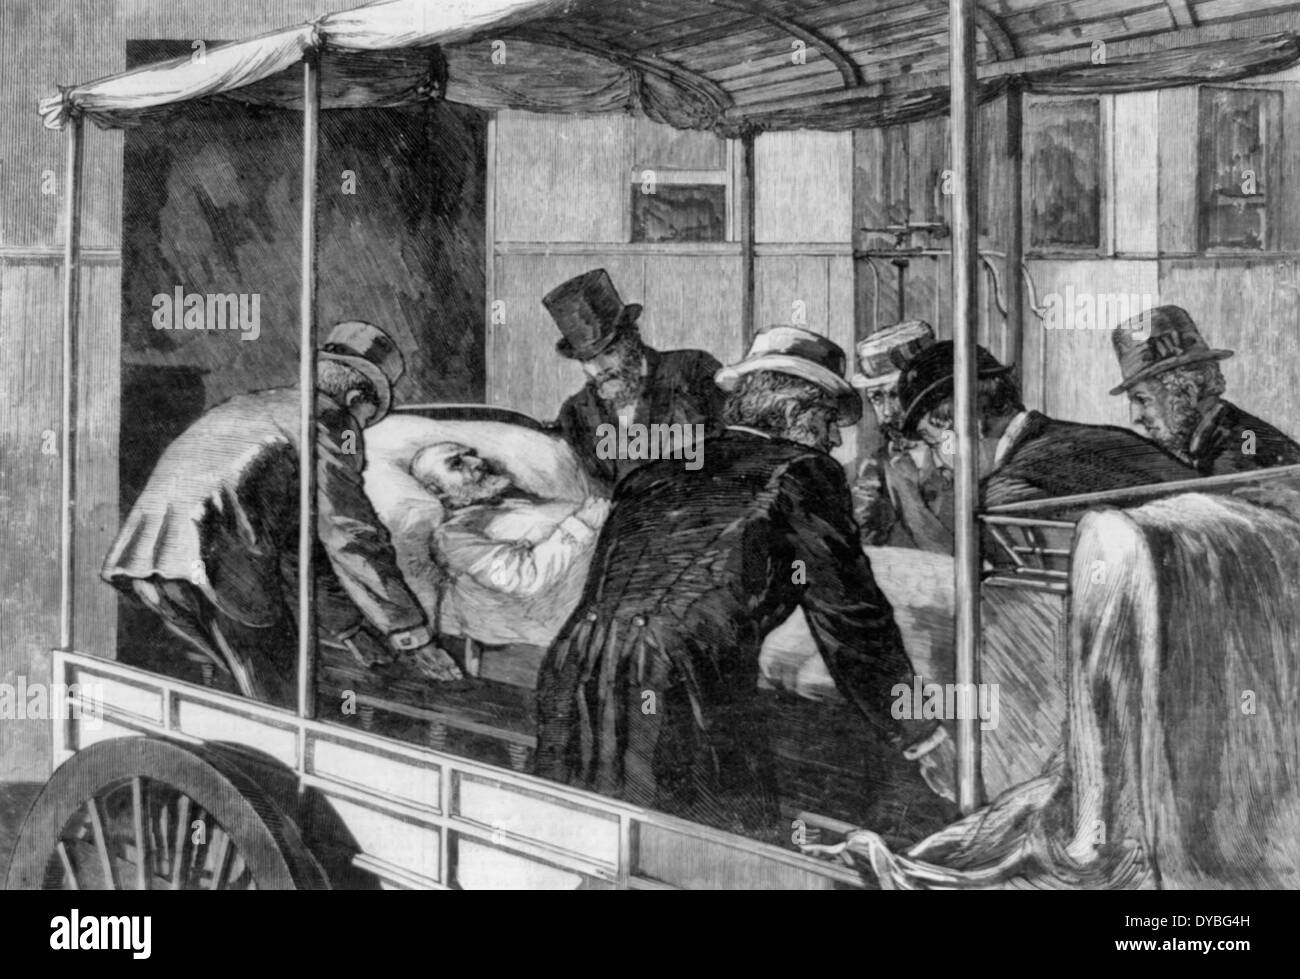 Removing the President from the Express Wagon to the Railway Car - From Washington to Elberon. President James Garfield after he was shot, 1881 Stock Photo